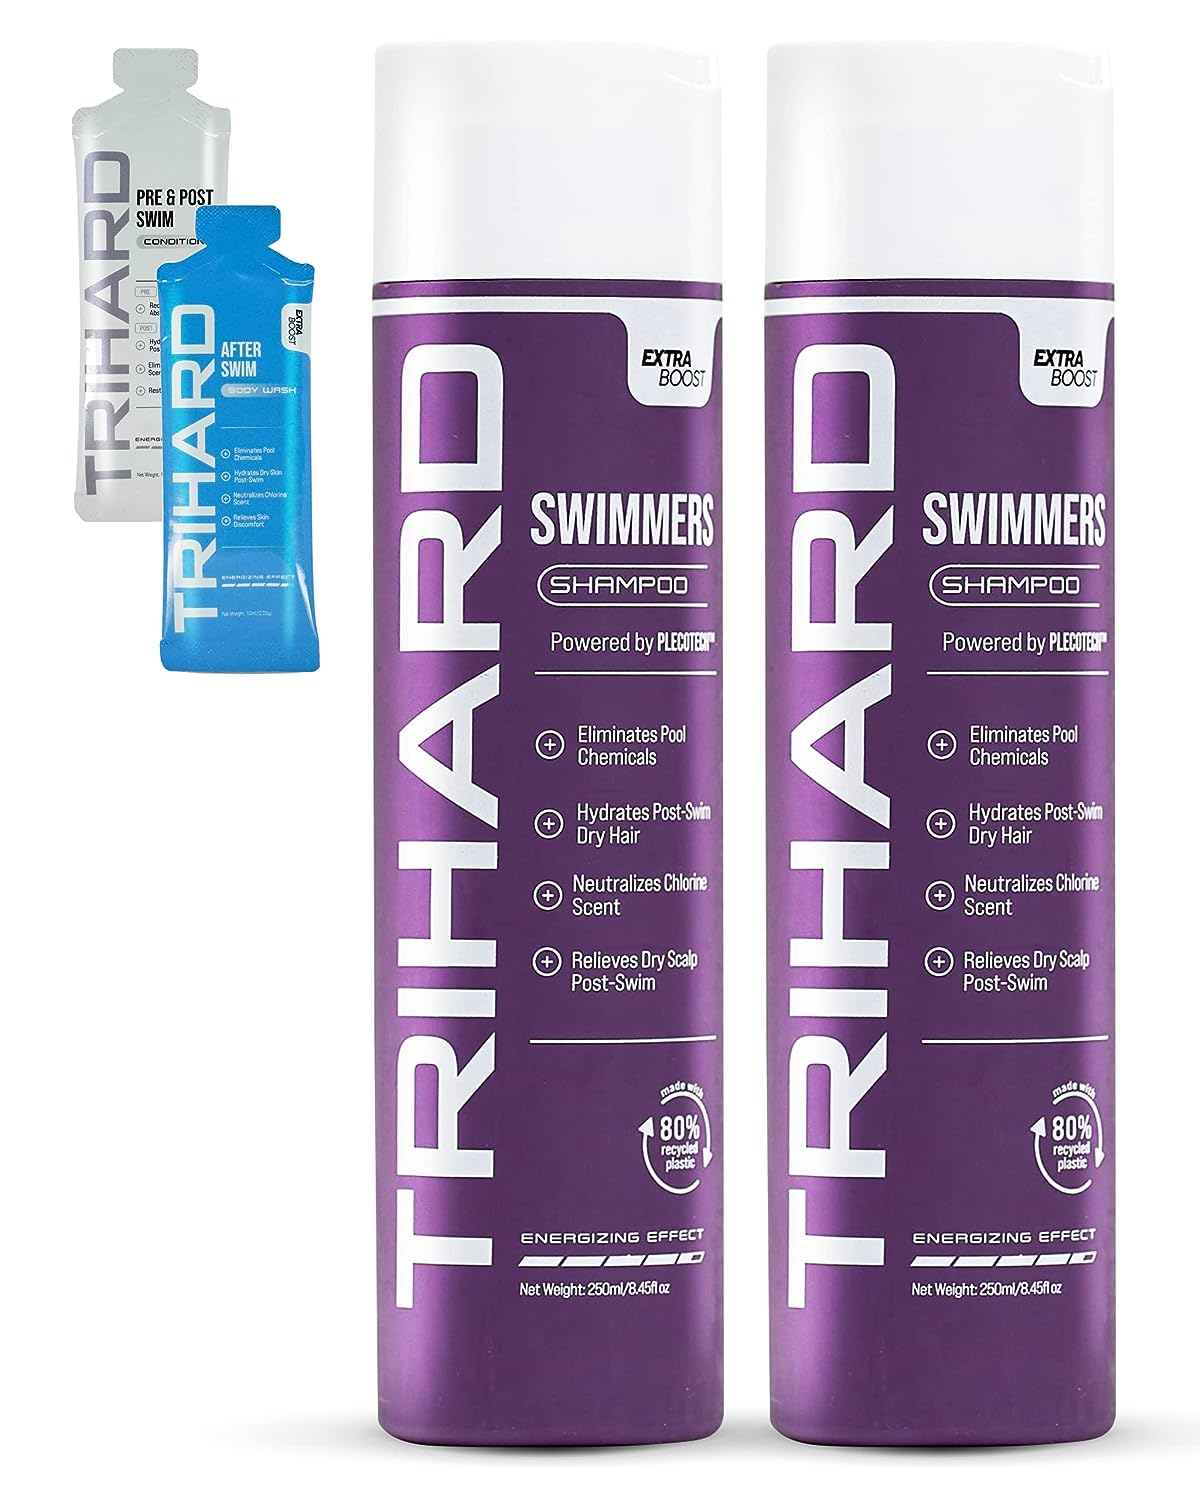 TRIHARD Swimmers Shampoo Extra Boost | Removing Chlorine and Hard Water Negative Effects | Specialized Swim Shampoo (Pack of 2)